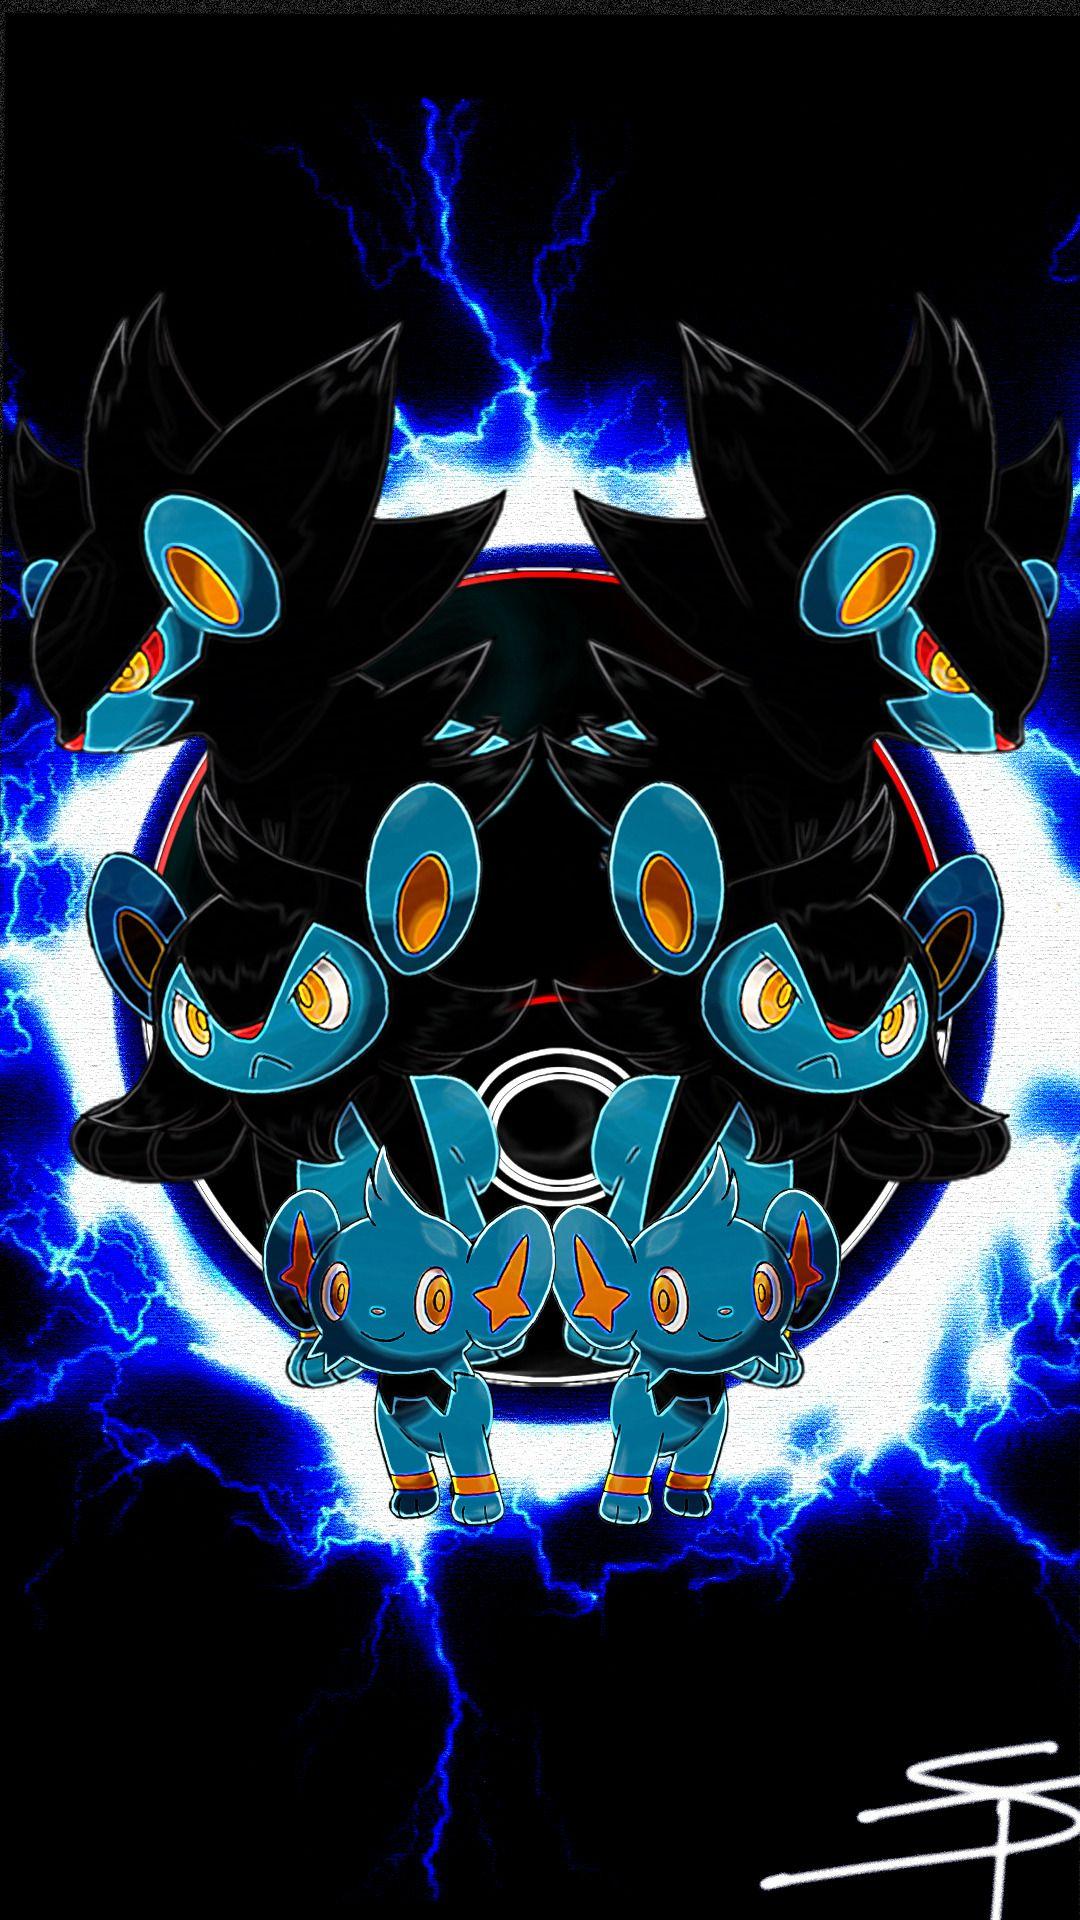 Download wallpaper 800x1200 animal, background, pokemon, luxray iphone 4s/4  for parallax hd background